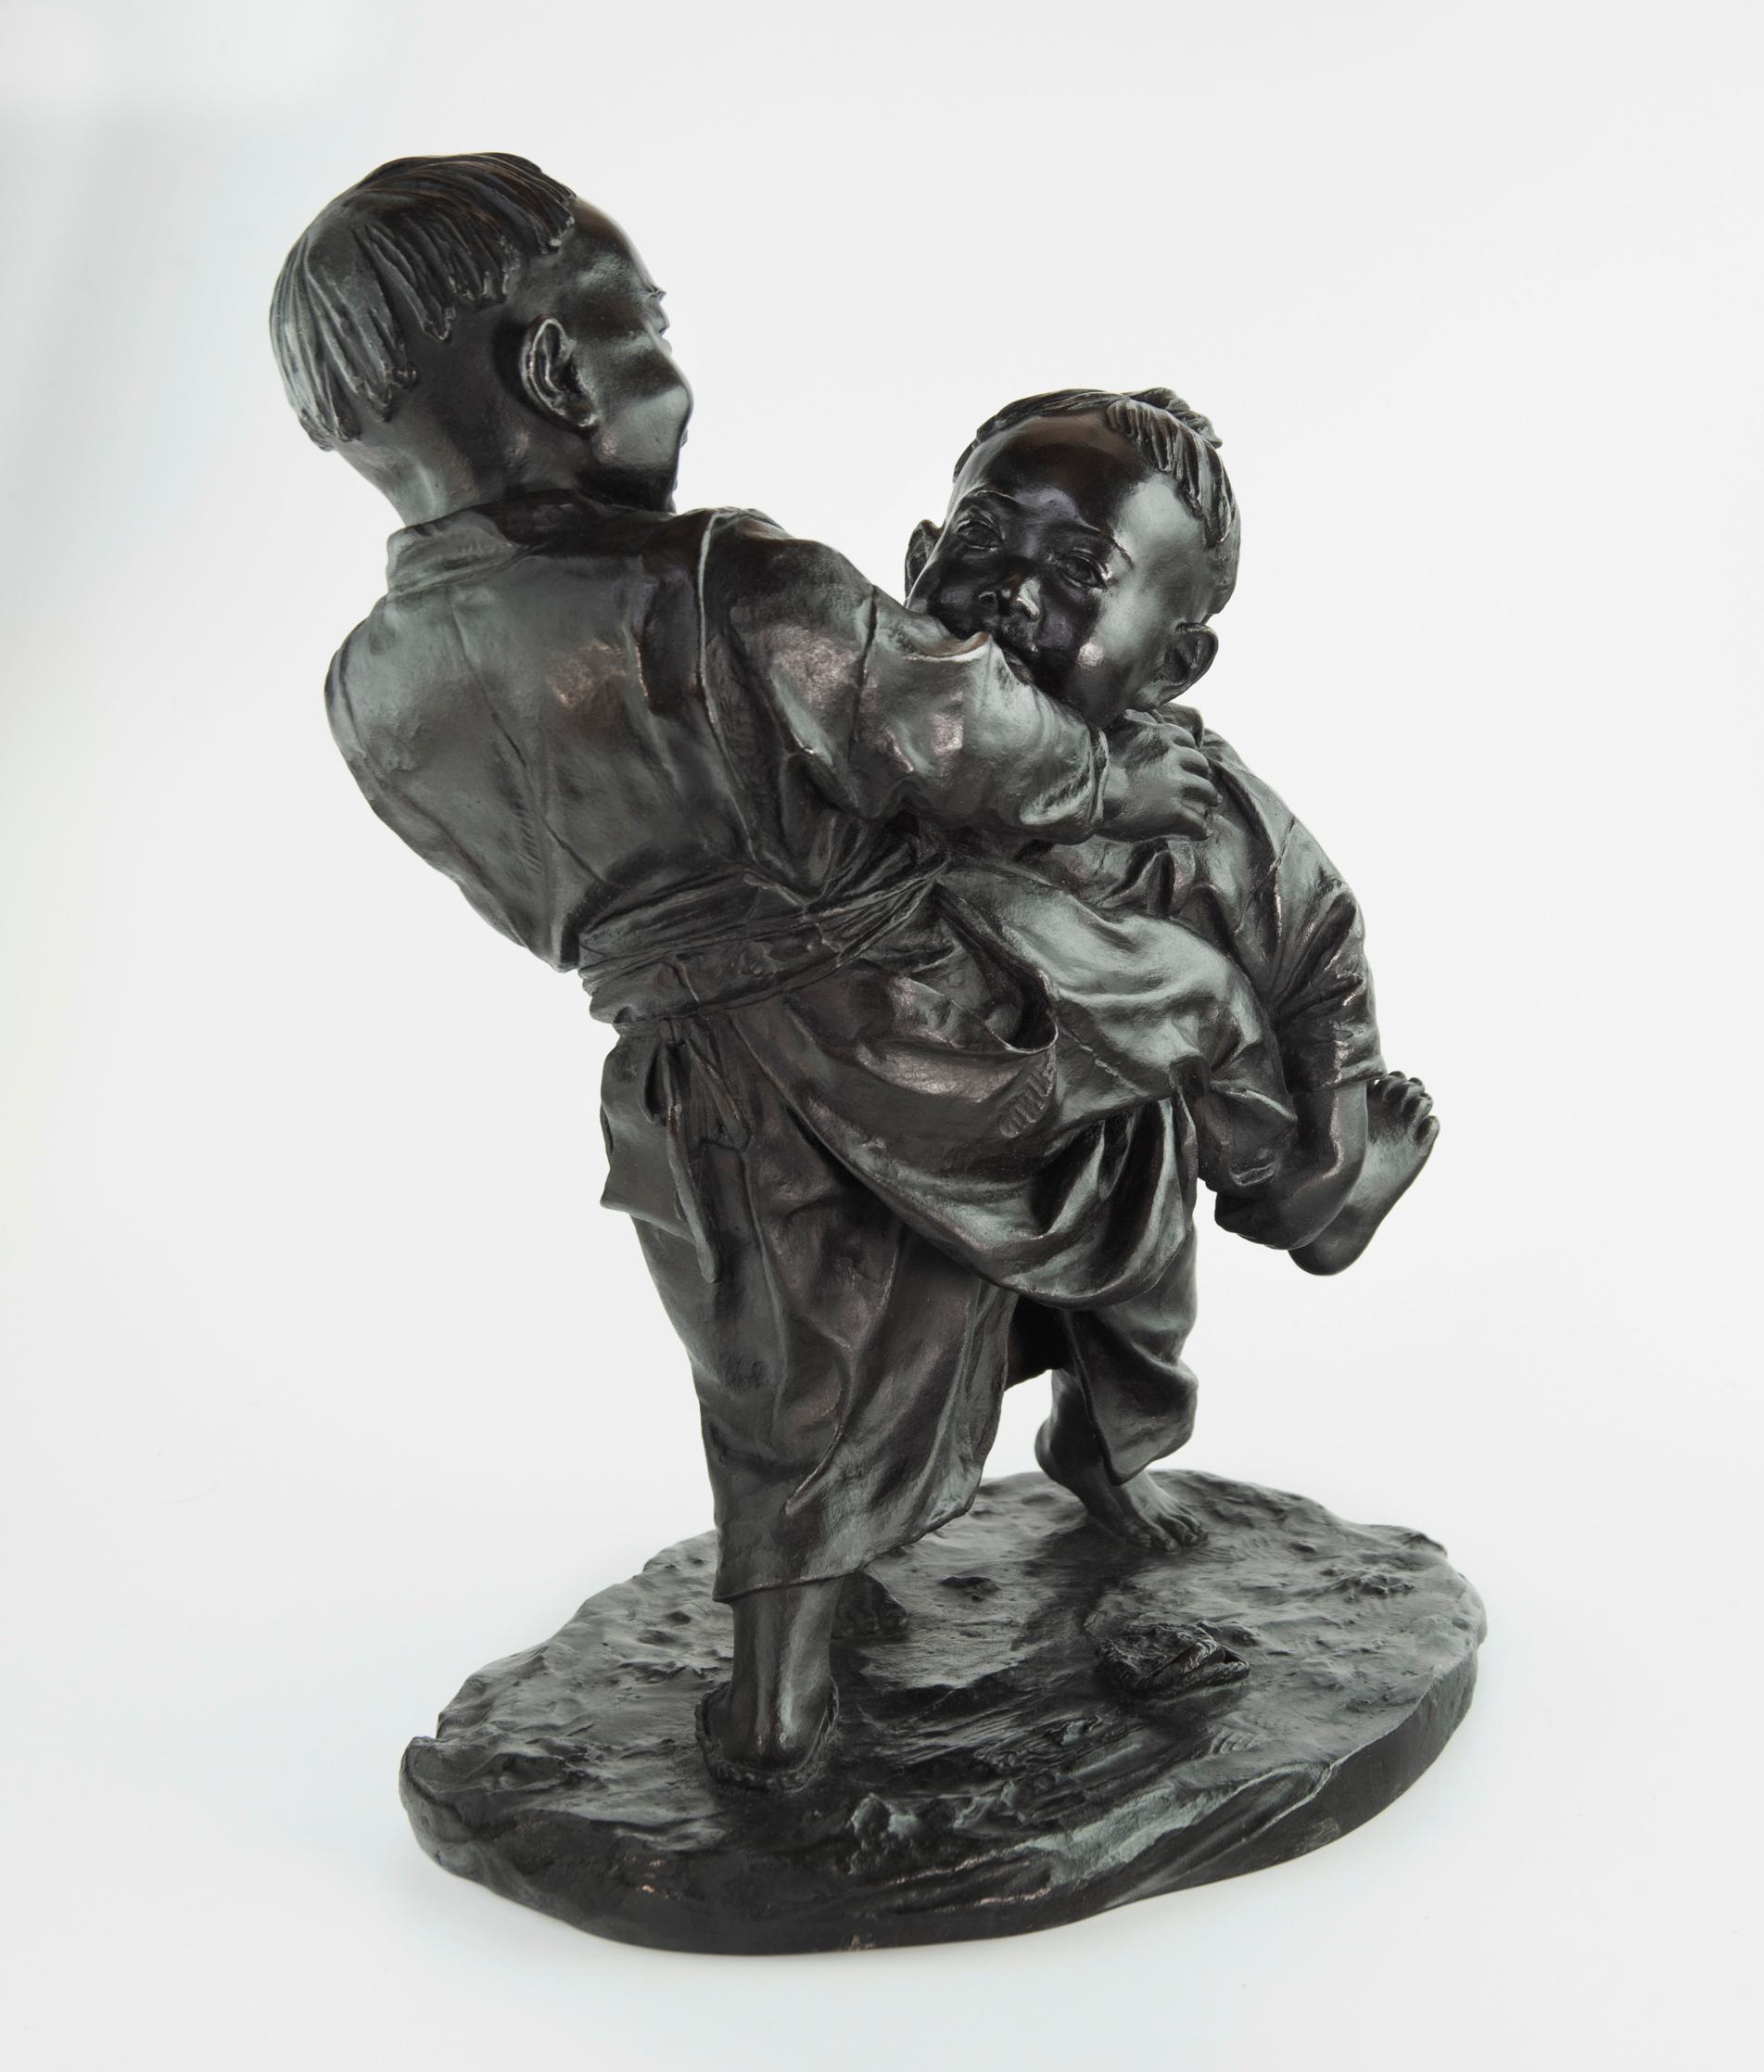 As part of our Japanese works of art collection we are delighted to offer this Meiji period 1868-1912 , Tokyo school bronze okimono of two boys playfully wrestling, this captivating study has been cast by the highly regarded and well recorded Tokyo